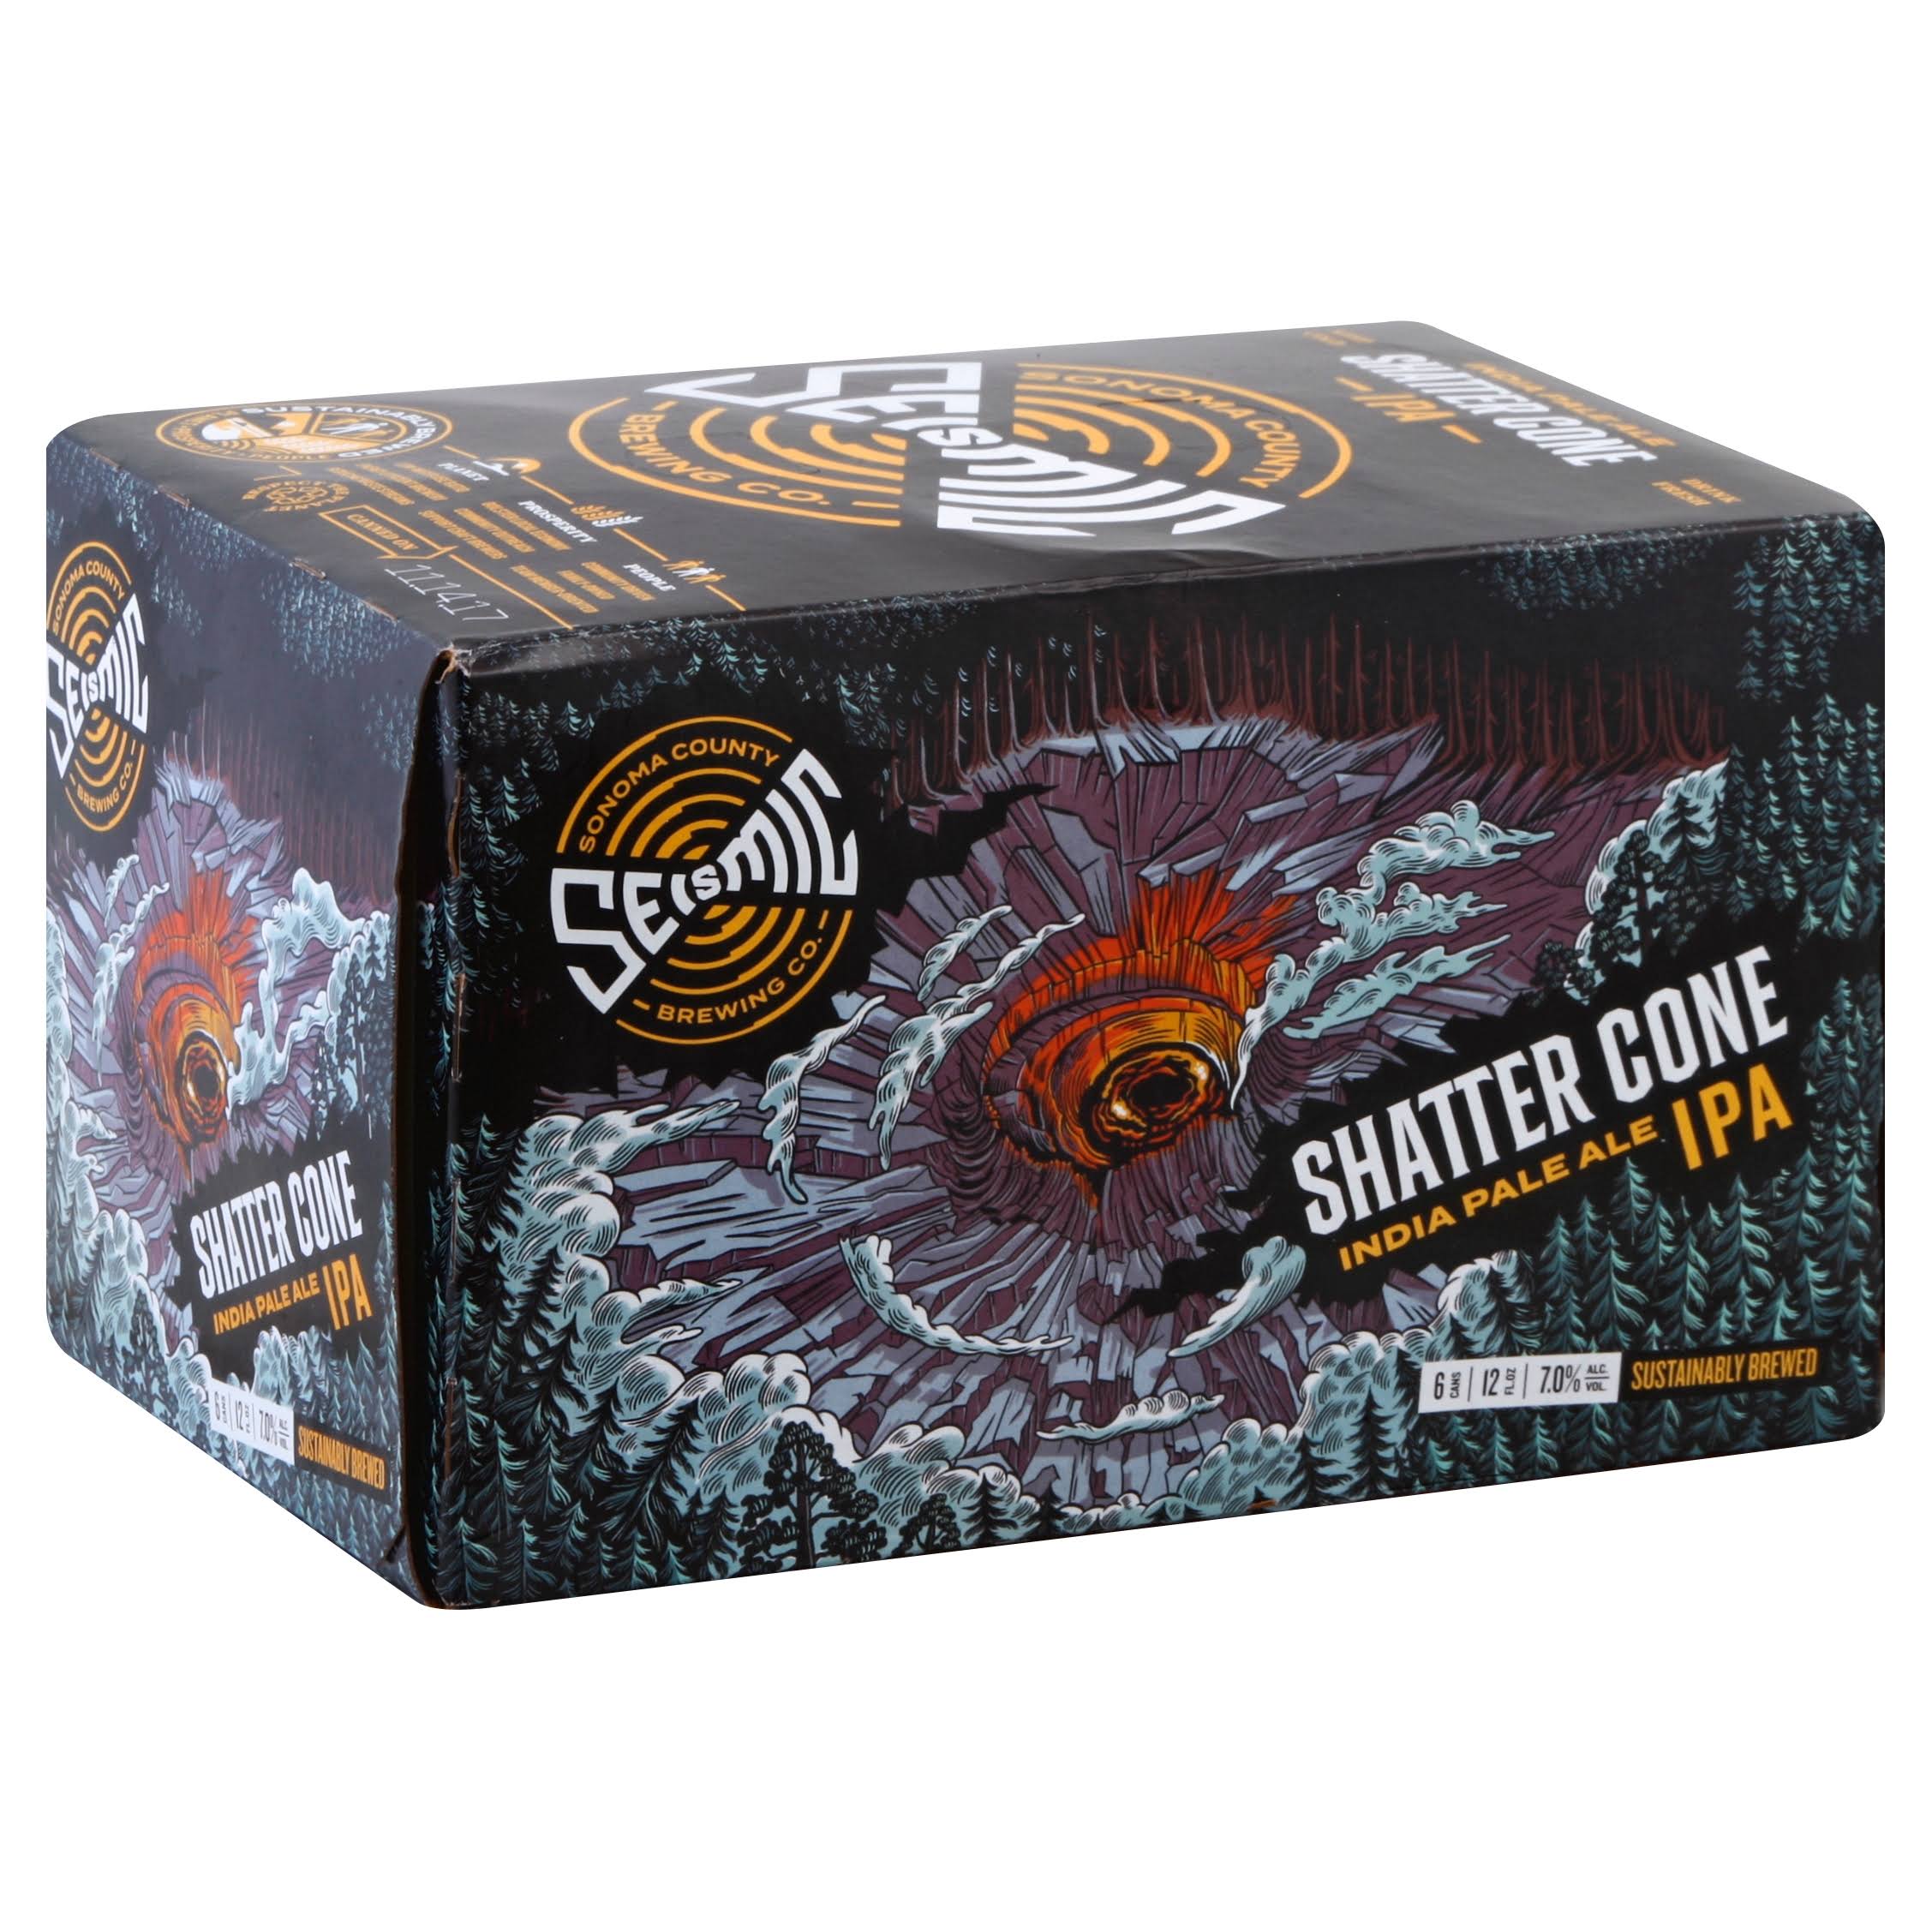 Seismic Beer, India Pale Ale, Shatter Gone IPA - 6 pack, 12 fl oz cans